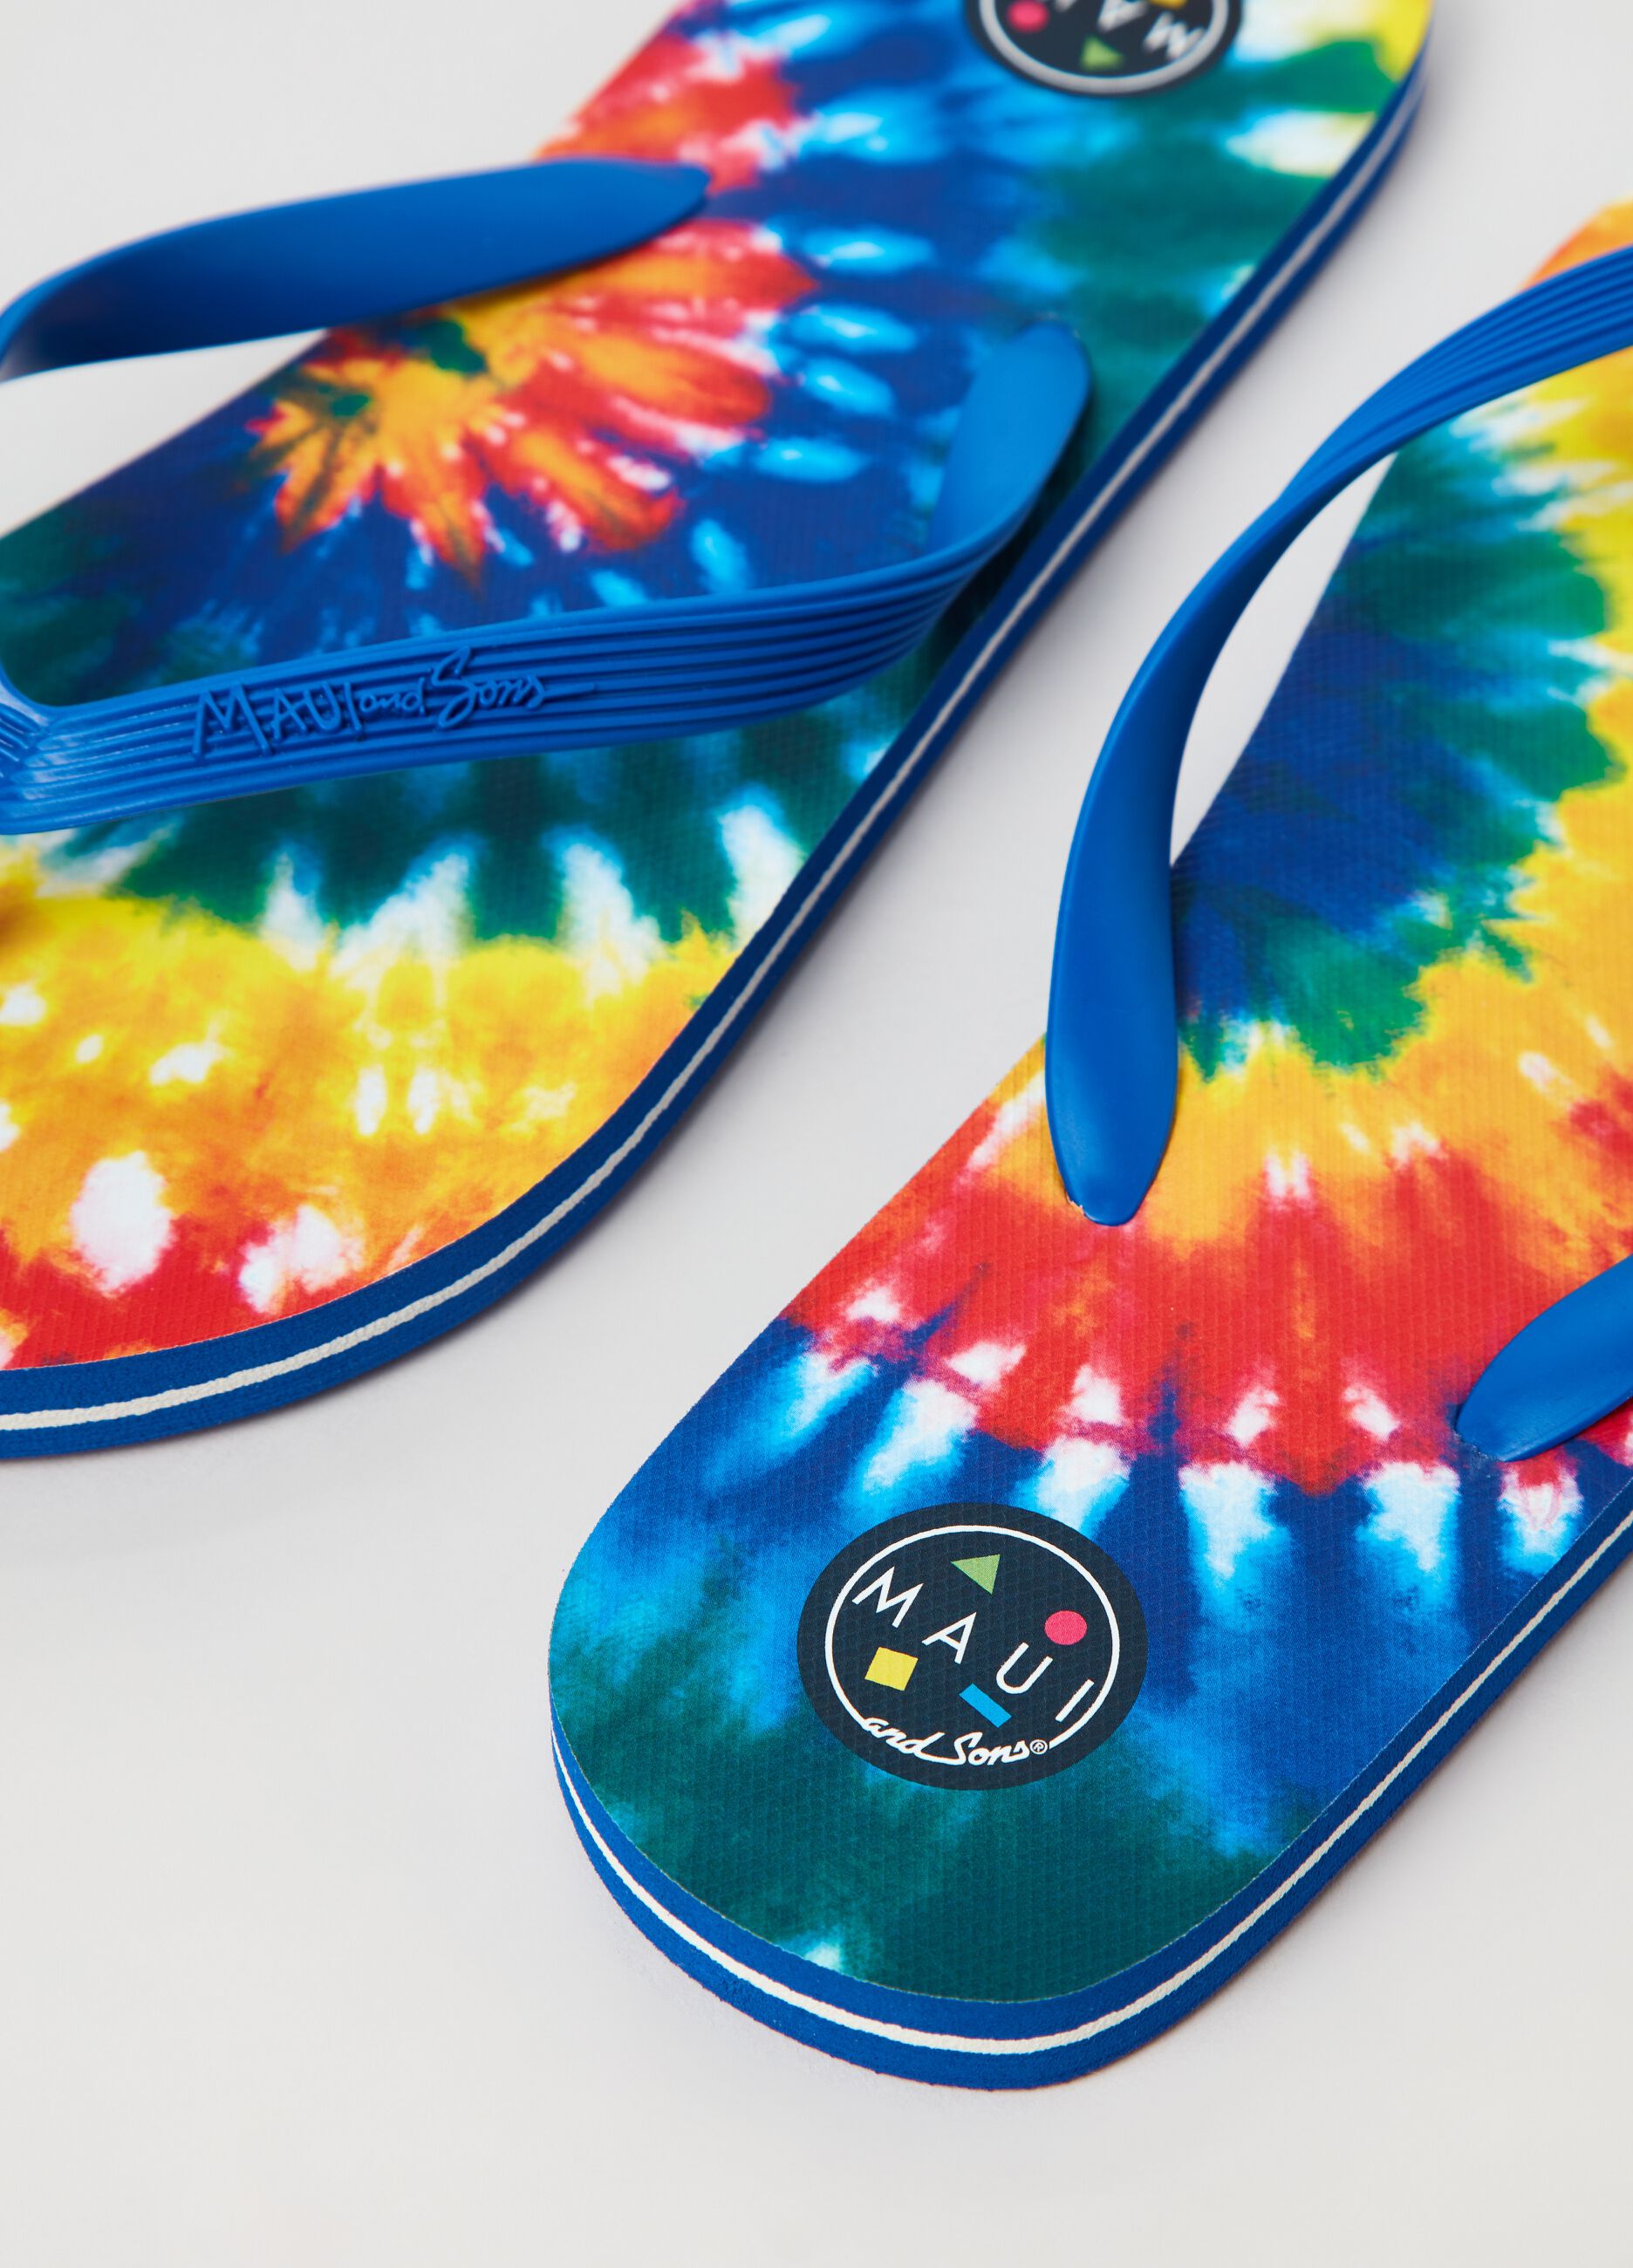 Tie-dye thong sandal by Maui and Sons